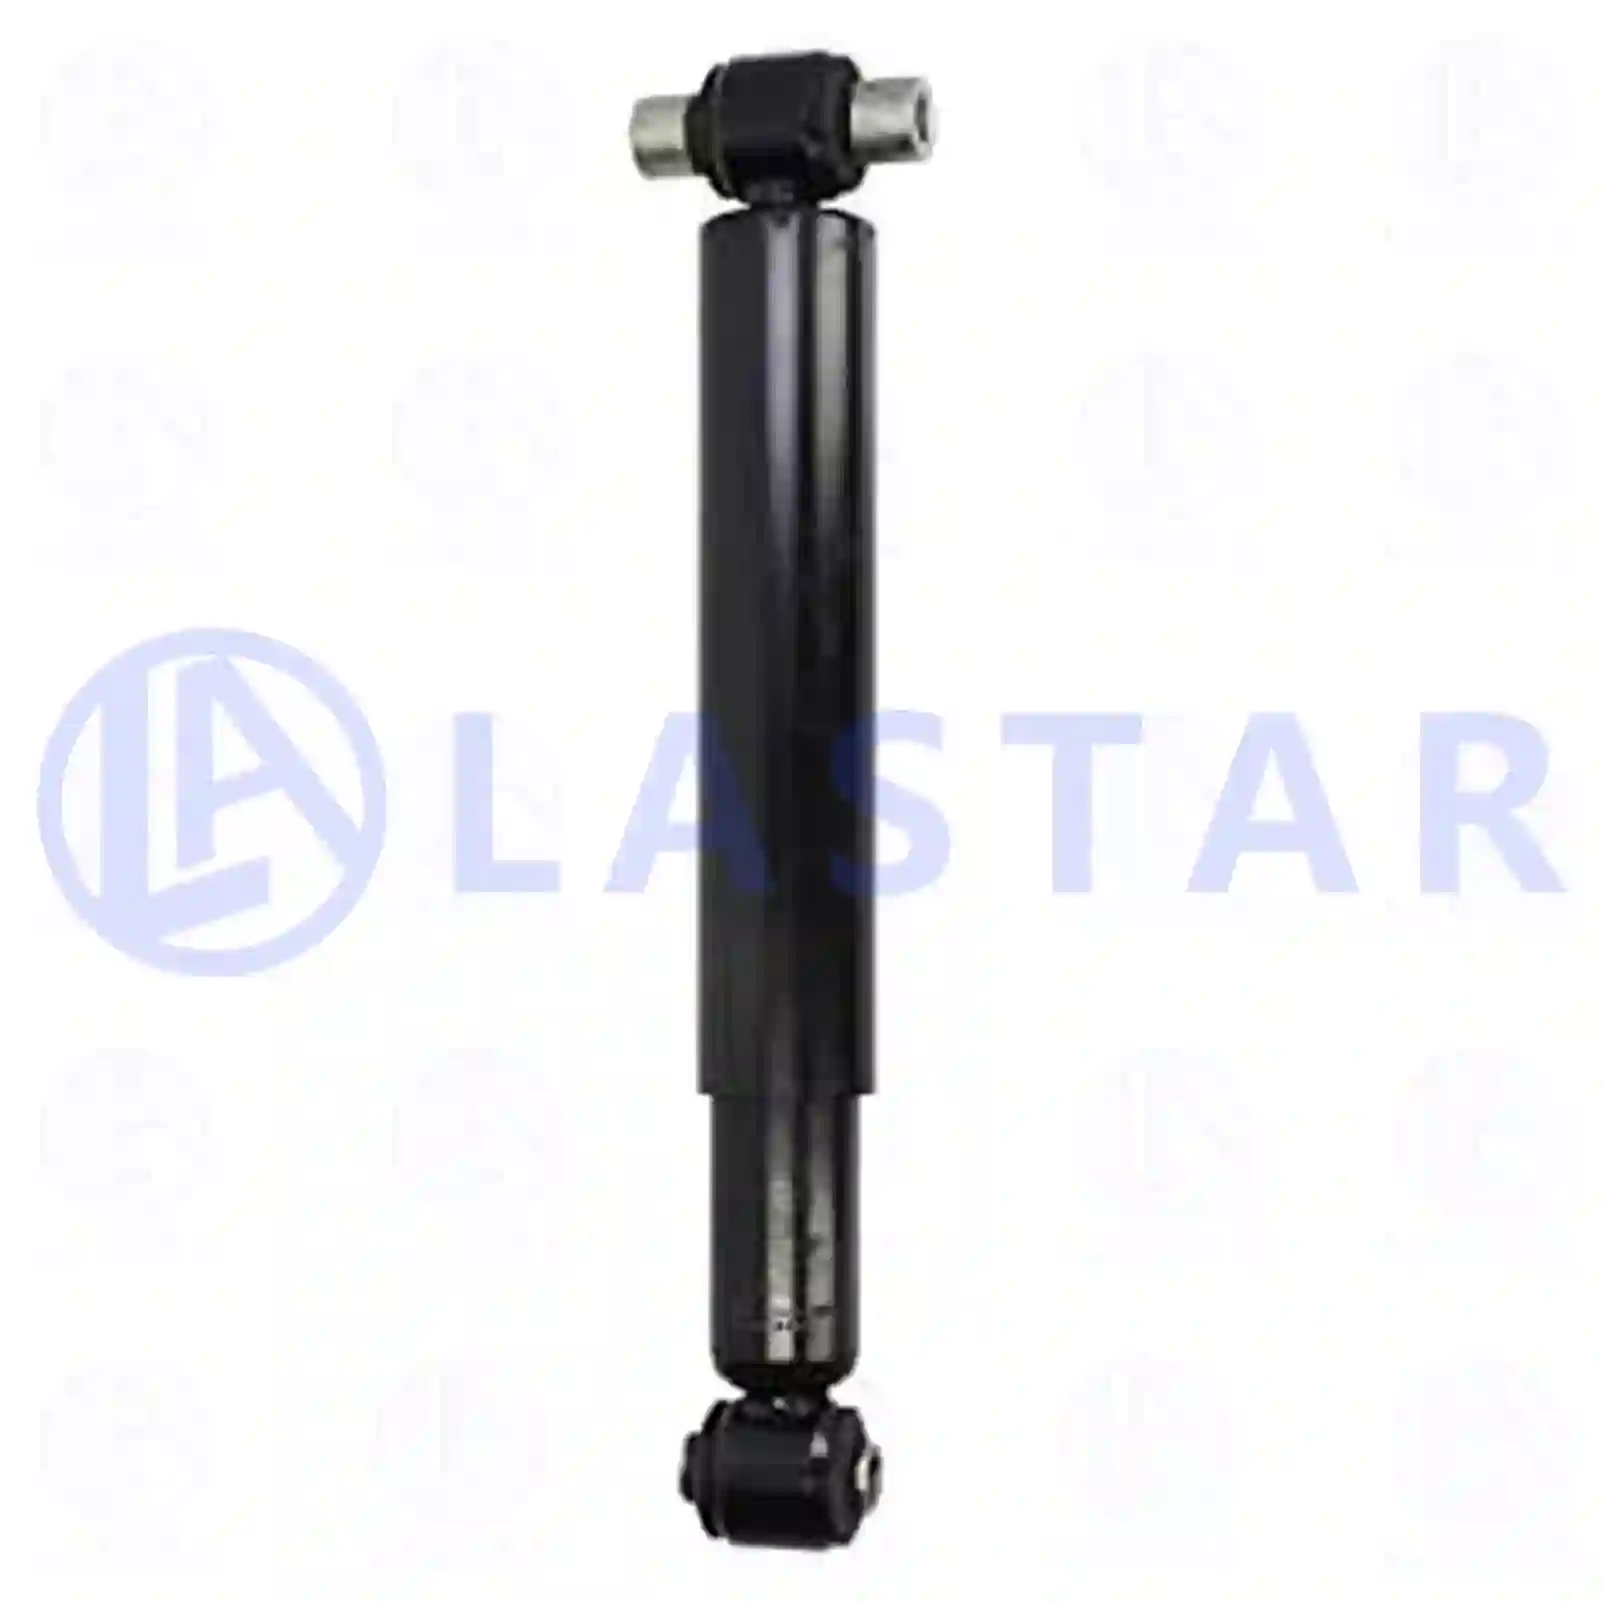 Shock absorber, 77727686, 1076717, 1629478, 20374545, 3987957, ZG41546-0008 ||  77727686 Lastar Spare Part | Truck Spare Parts, Auotomotive Spare Parts Shock absorber, 77727686, 1076717, 1629478, 20374545, 3987957, ZG41546-0008 ||  77727686 Lastar Spare Part | Truck Spare Parts, Auotomotive Spare Parts